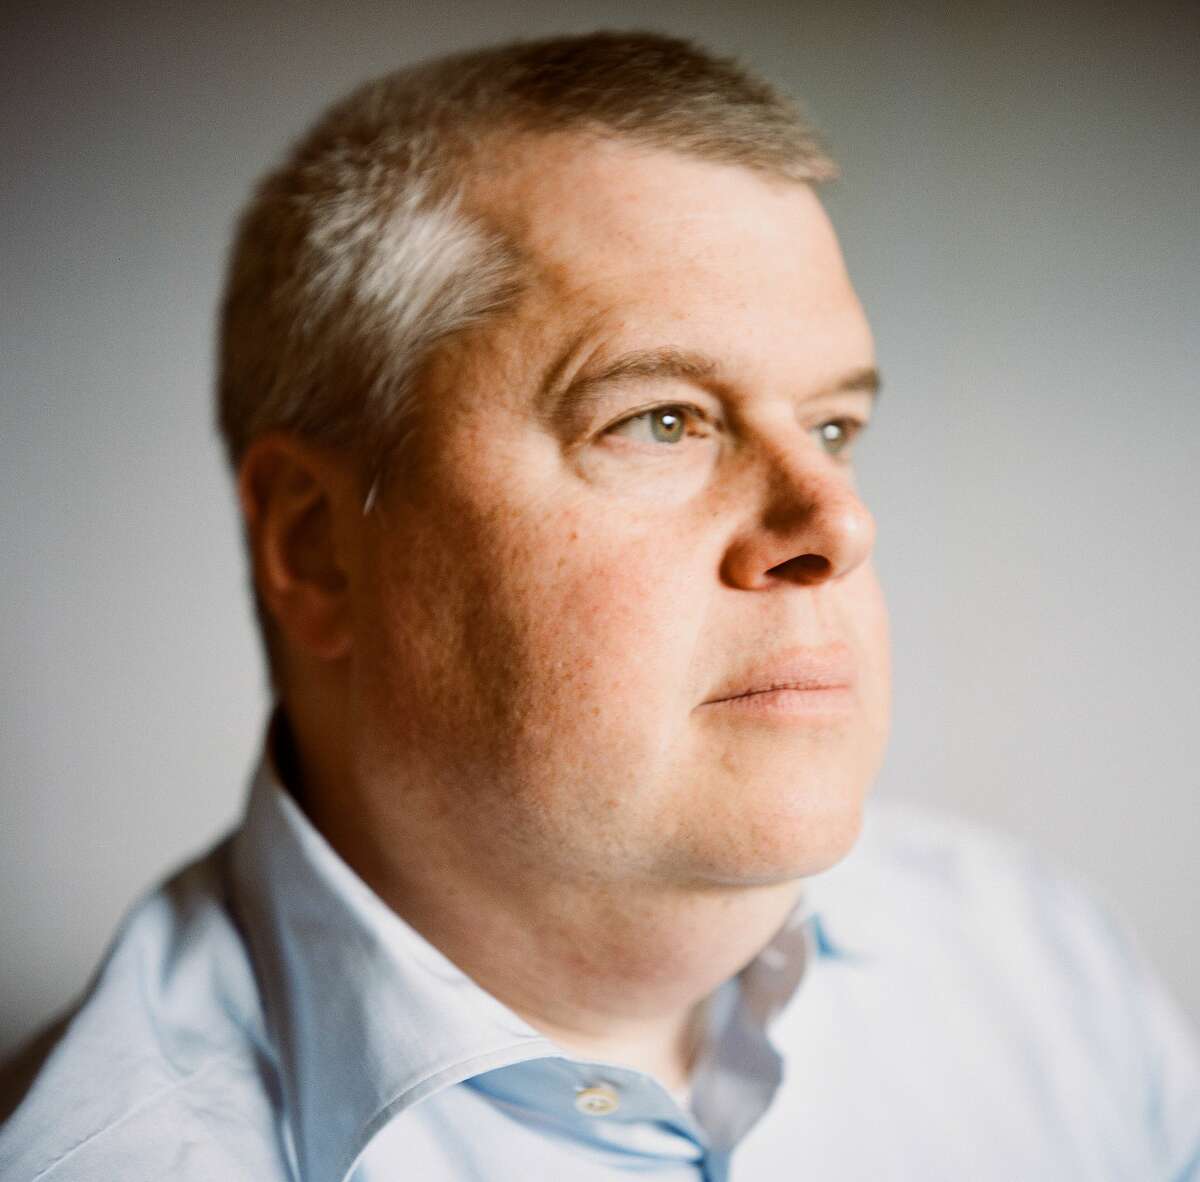 Daniel Handler has a new play opening, "Imaginary Comforts or The Story of the Ghost of the Dead Rabbit"